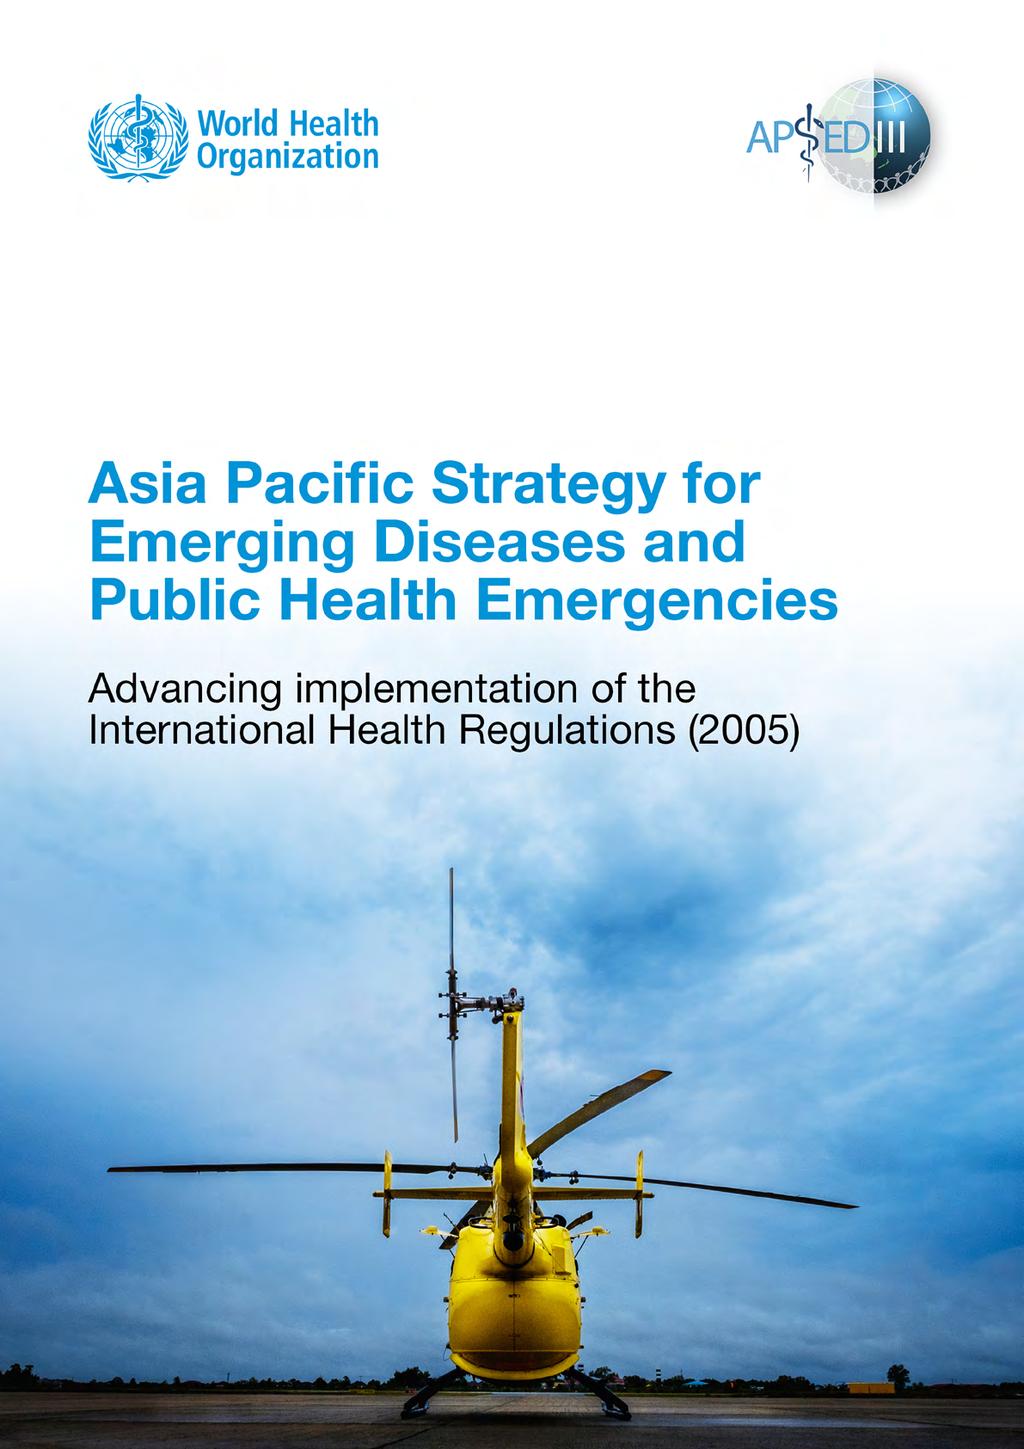 Asia Pacific Strategy for Emerging Diseases and Public Health Emergencies